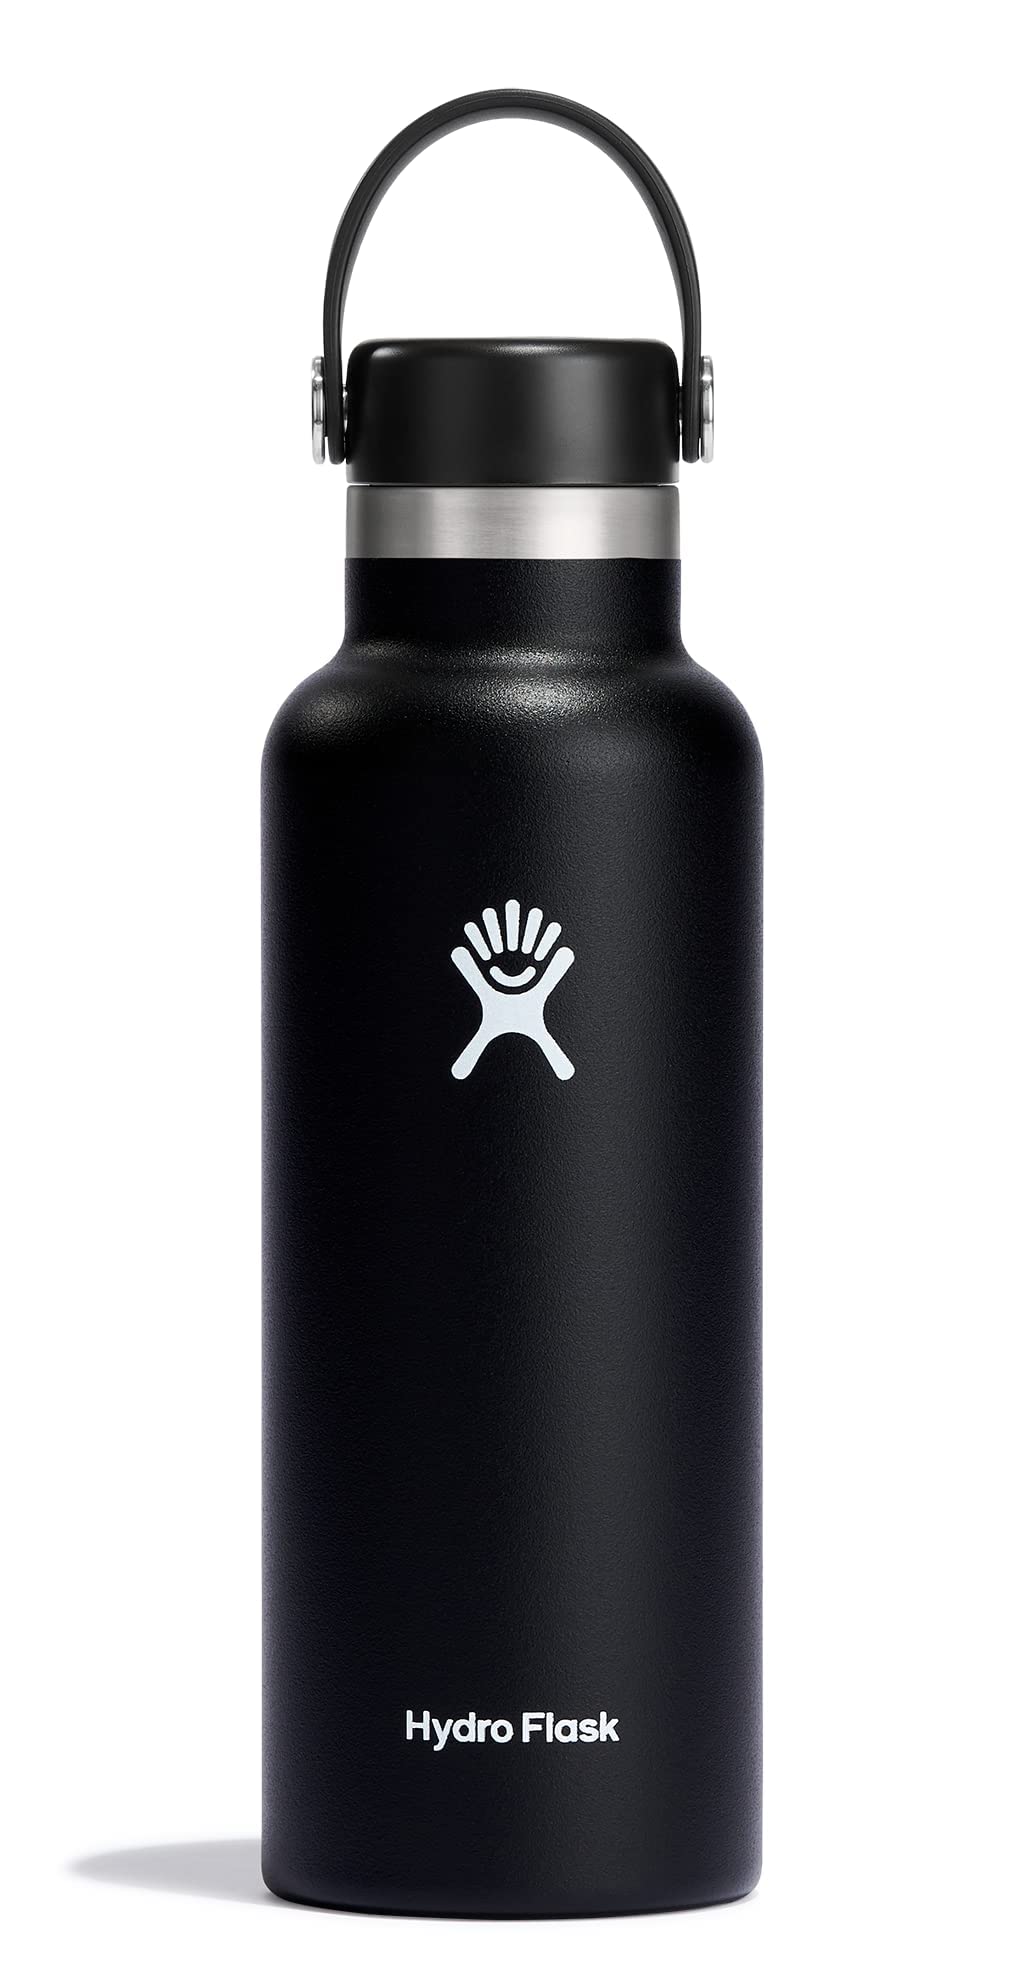 18-Oz Hydro Flask Stainless Steel Insulated Standard Mouth Water Bottle w/ Flex Cap (Black) $18.65 + Free Shipping w/ Prime or on $35+